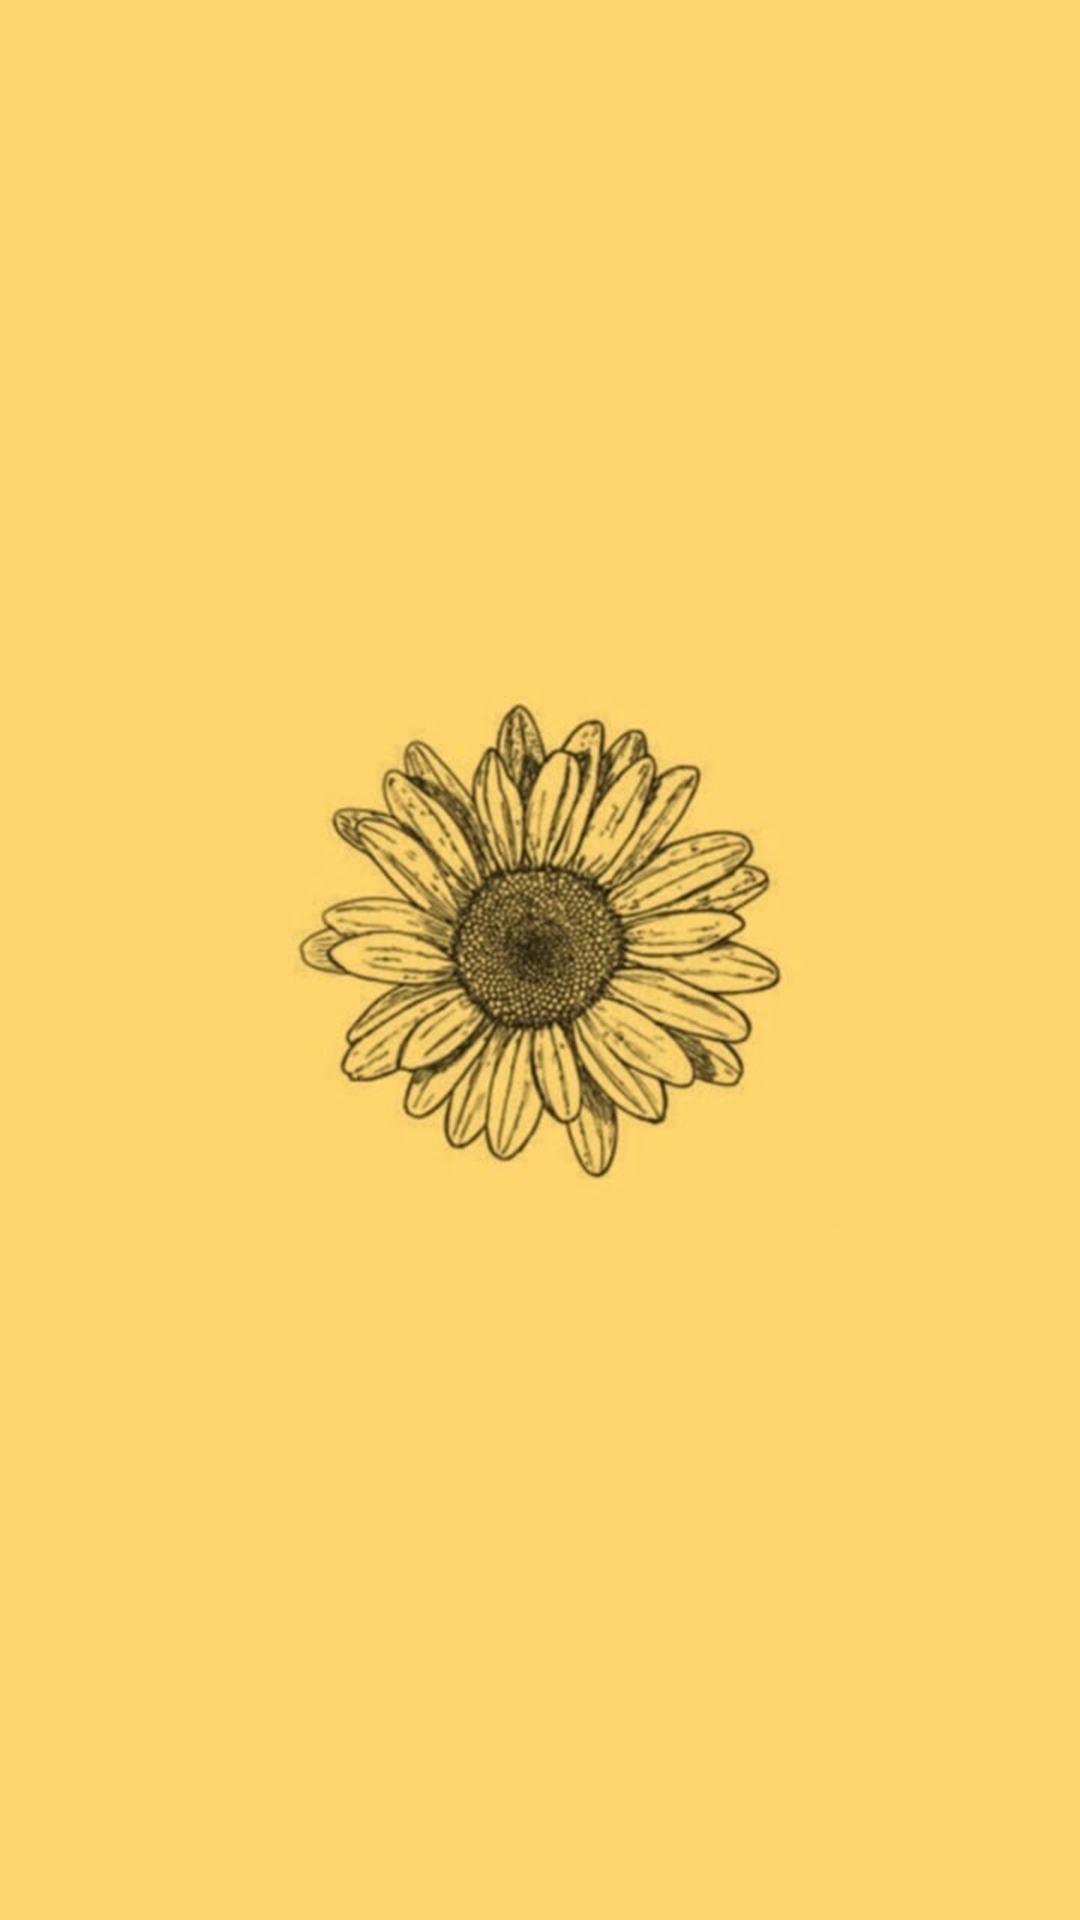 38 Sunflower iPhone Wallpapers to Download for Free  atinydreamer